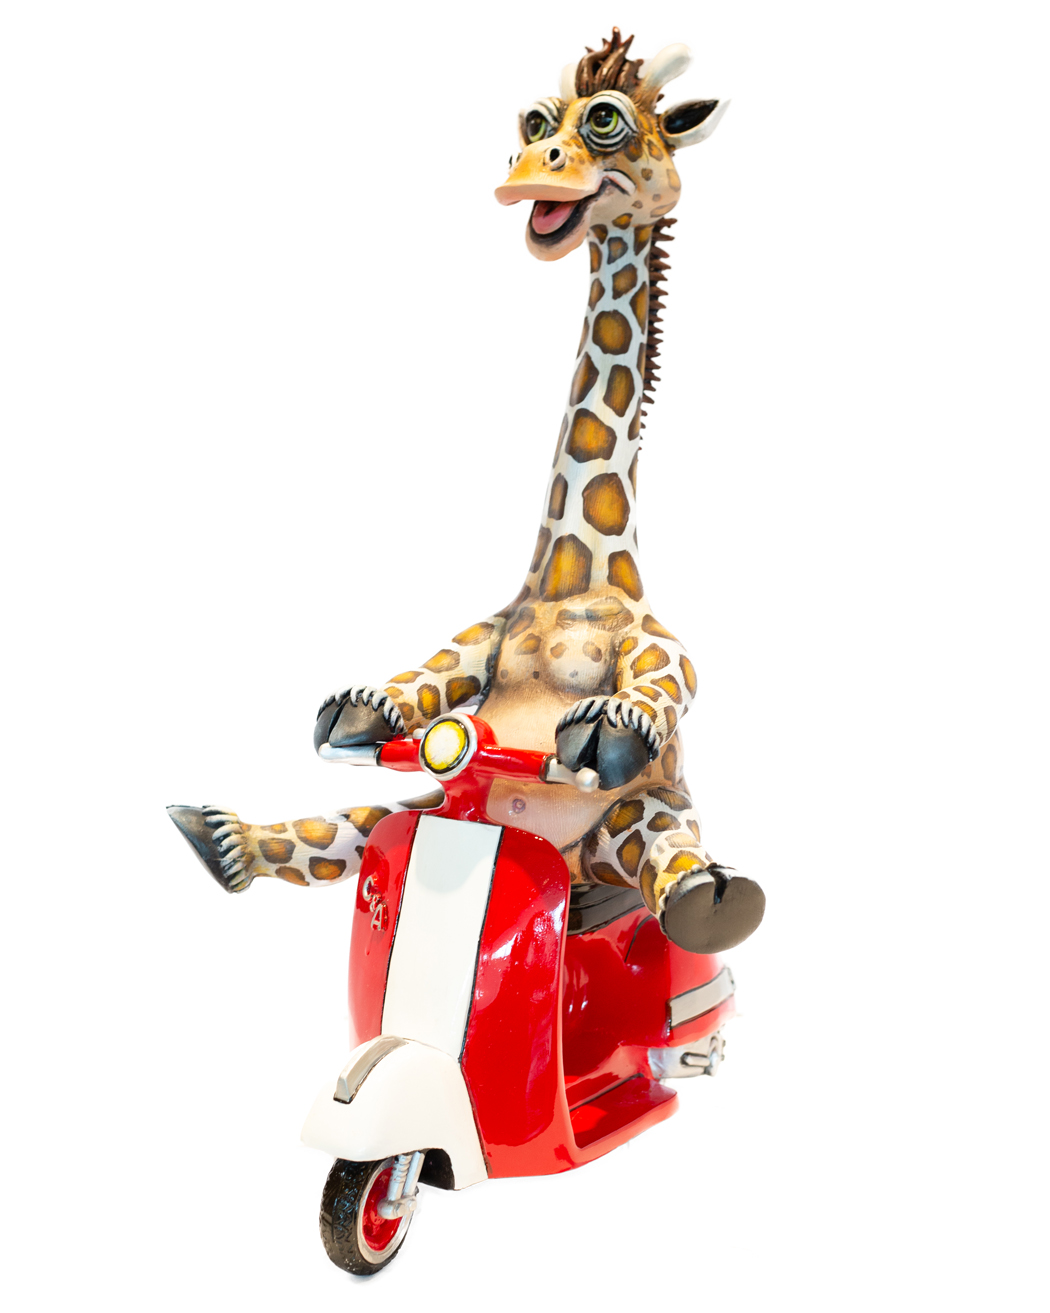 Signed, limited edition giraffe sculpture